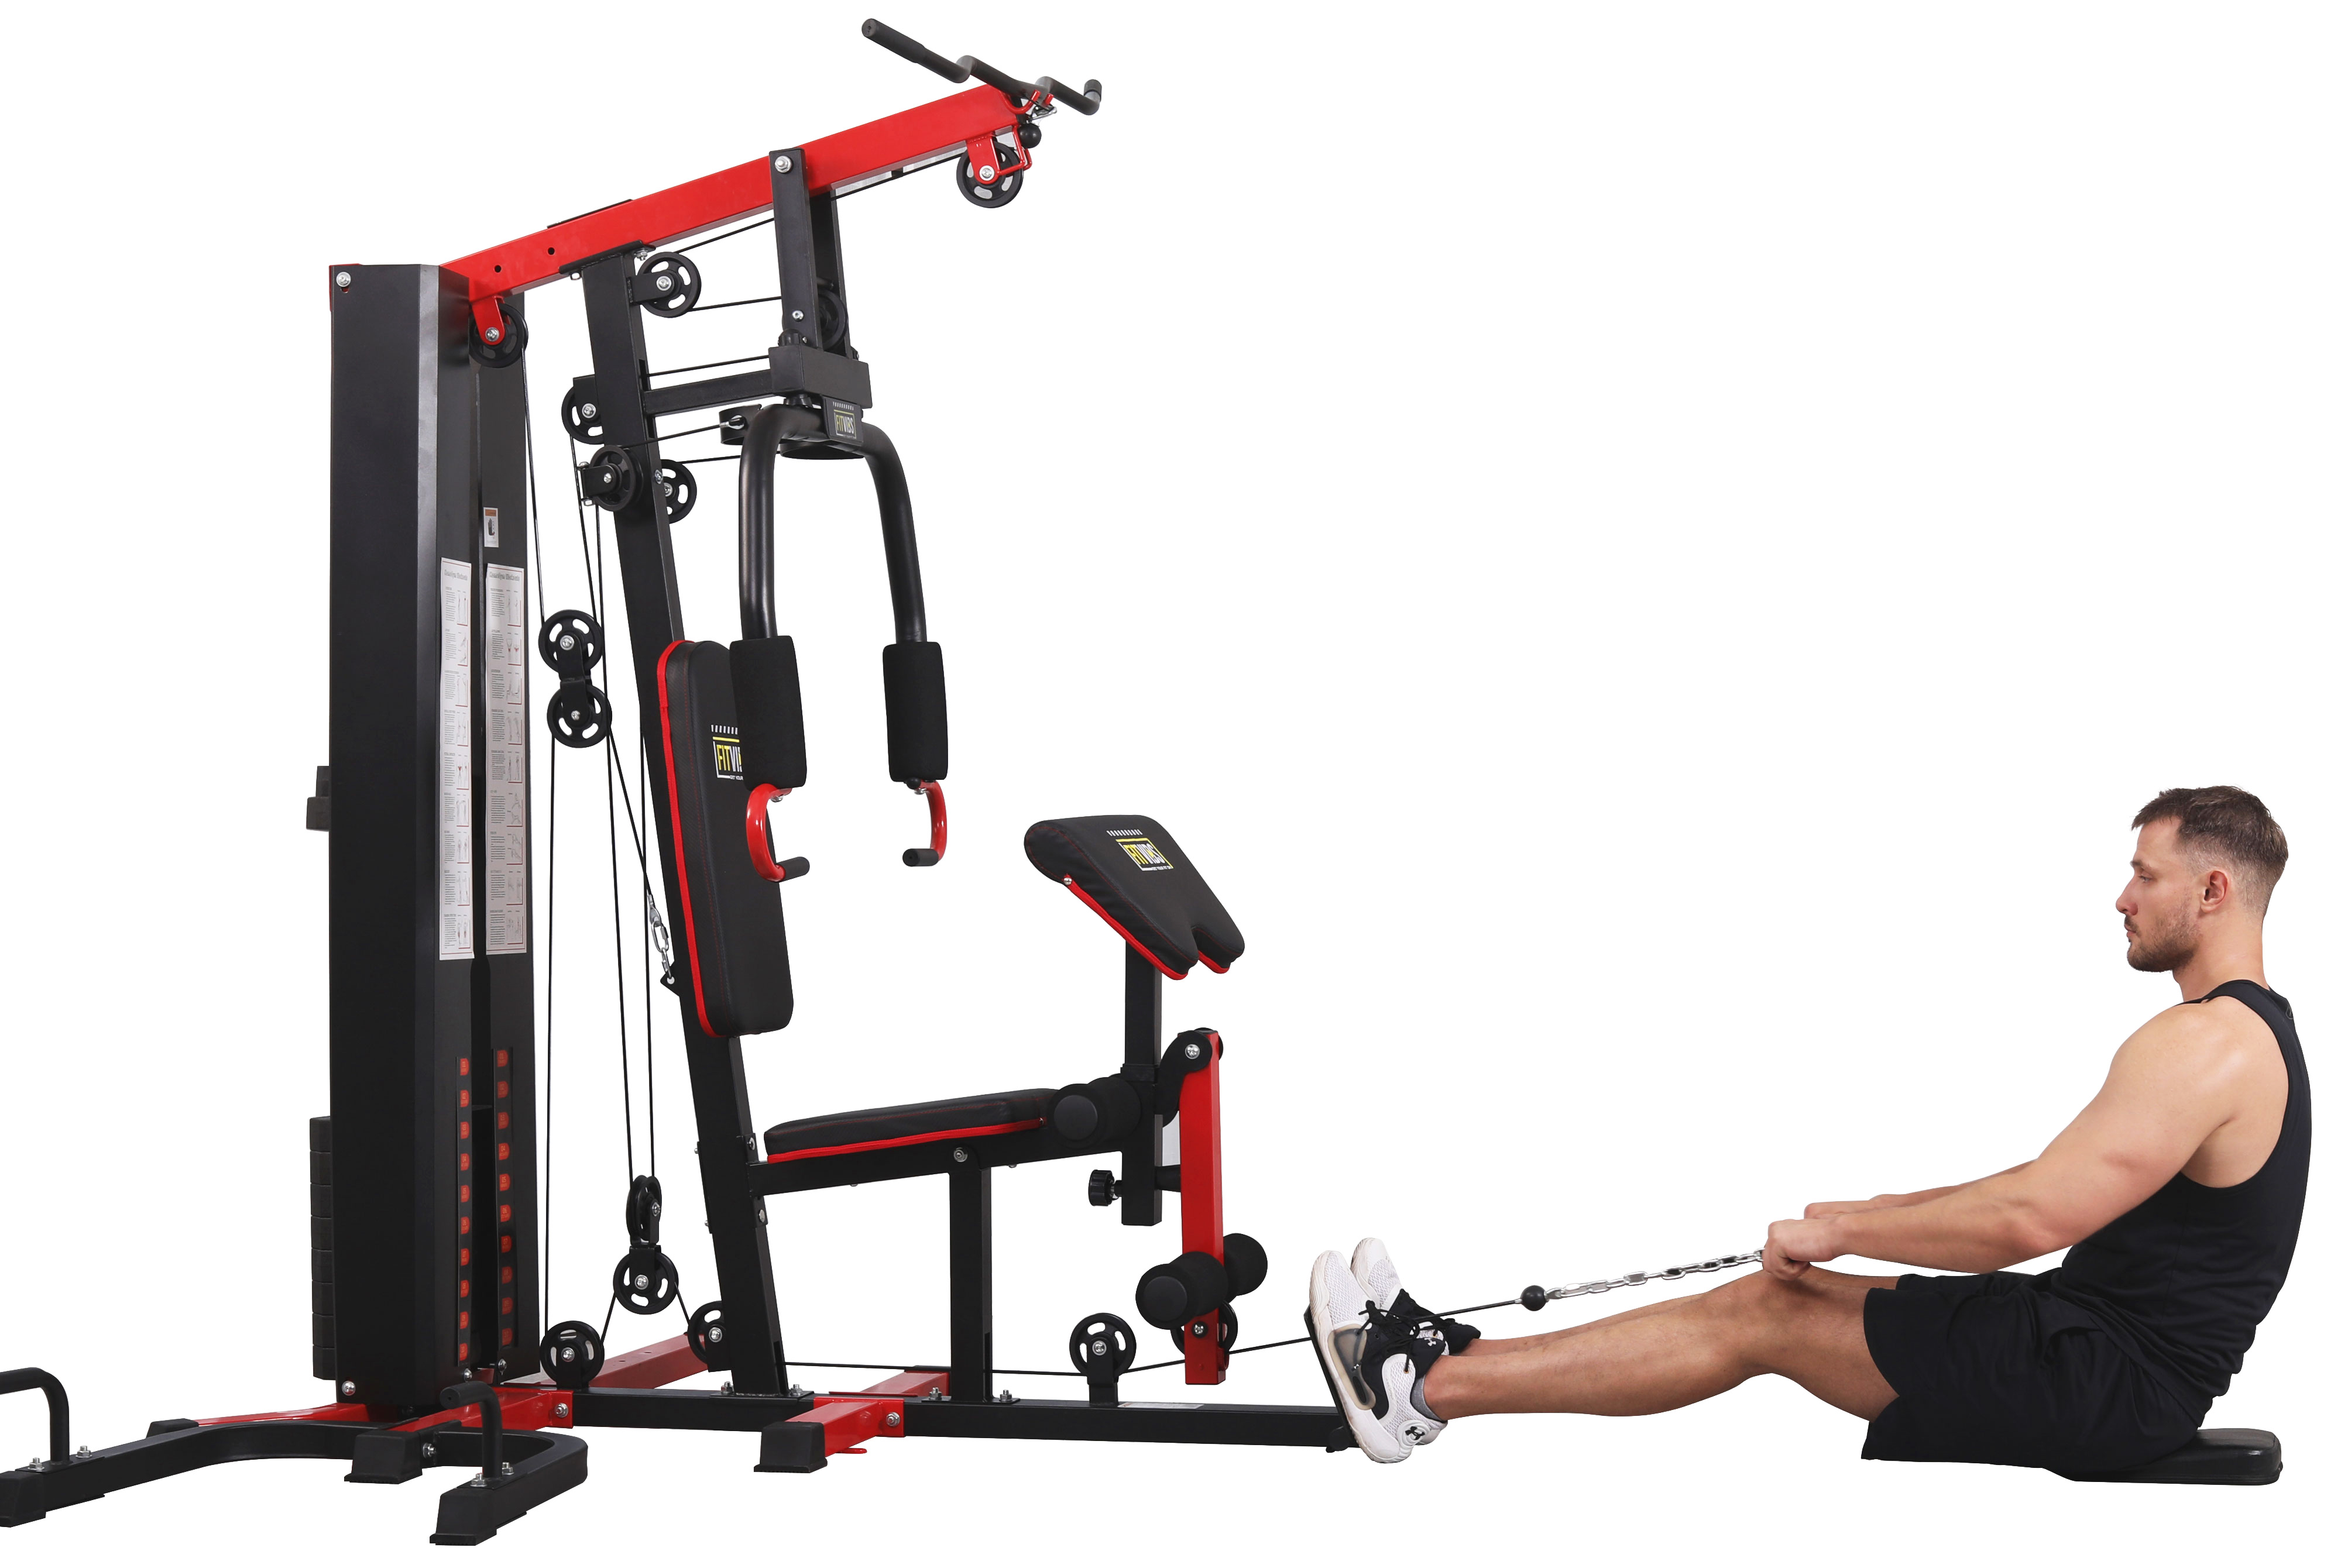 Fitvids LX800 Home Gym System Workout Station with 330 Lbs of Resistance, 122.5 Lbs Weight Stack, Two Station, Comes with Installation Instruction Video, Ships in 6 Boxes - image 3 of 13